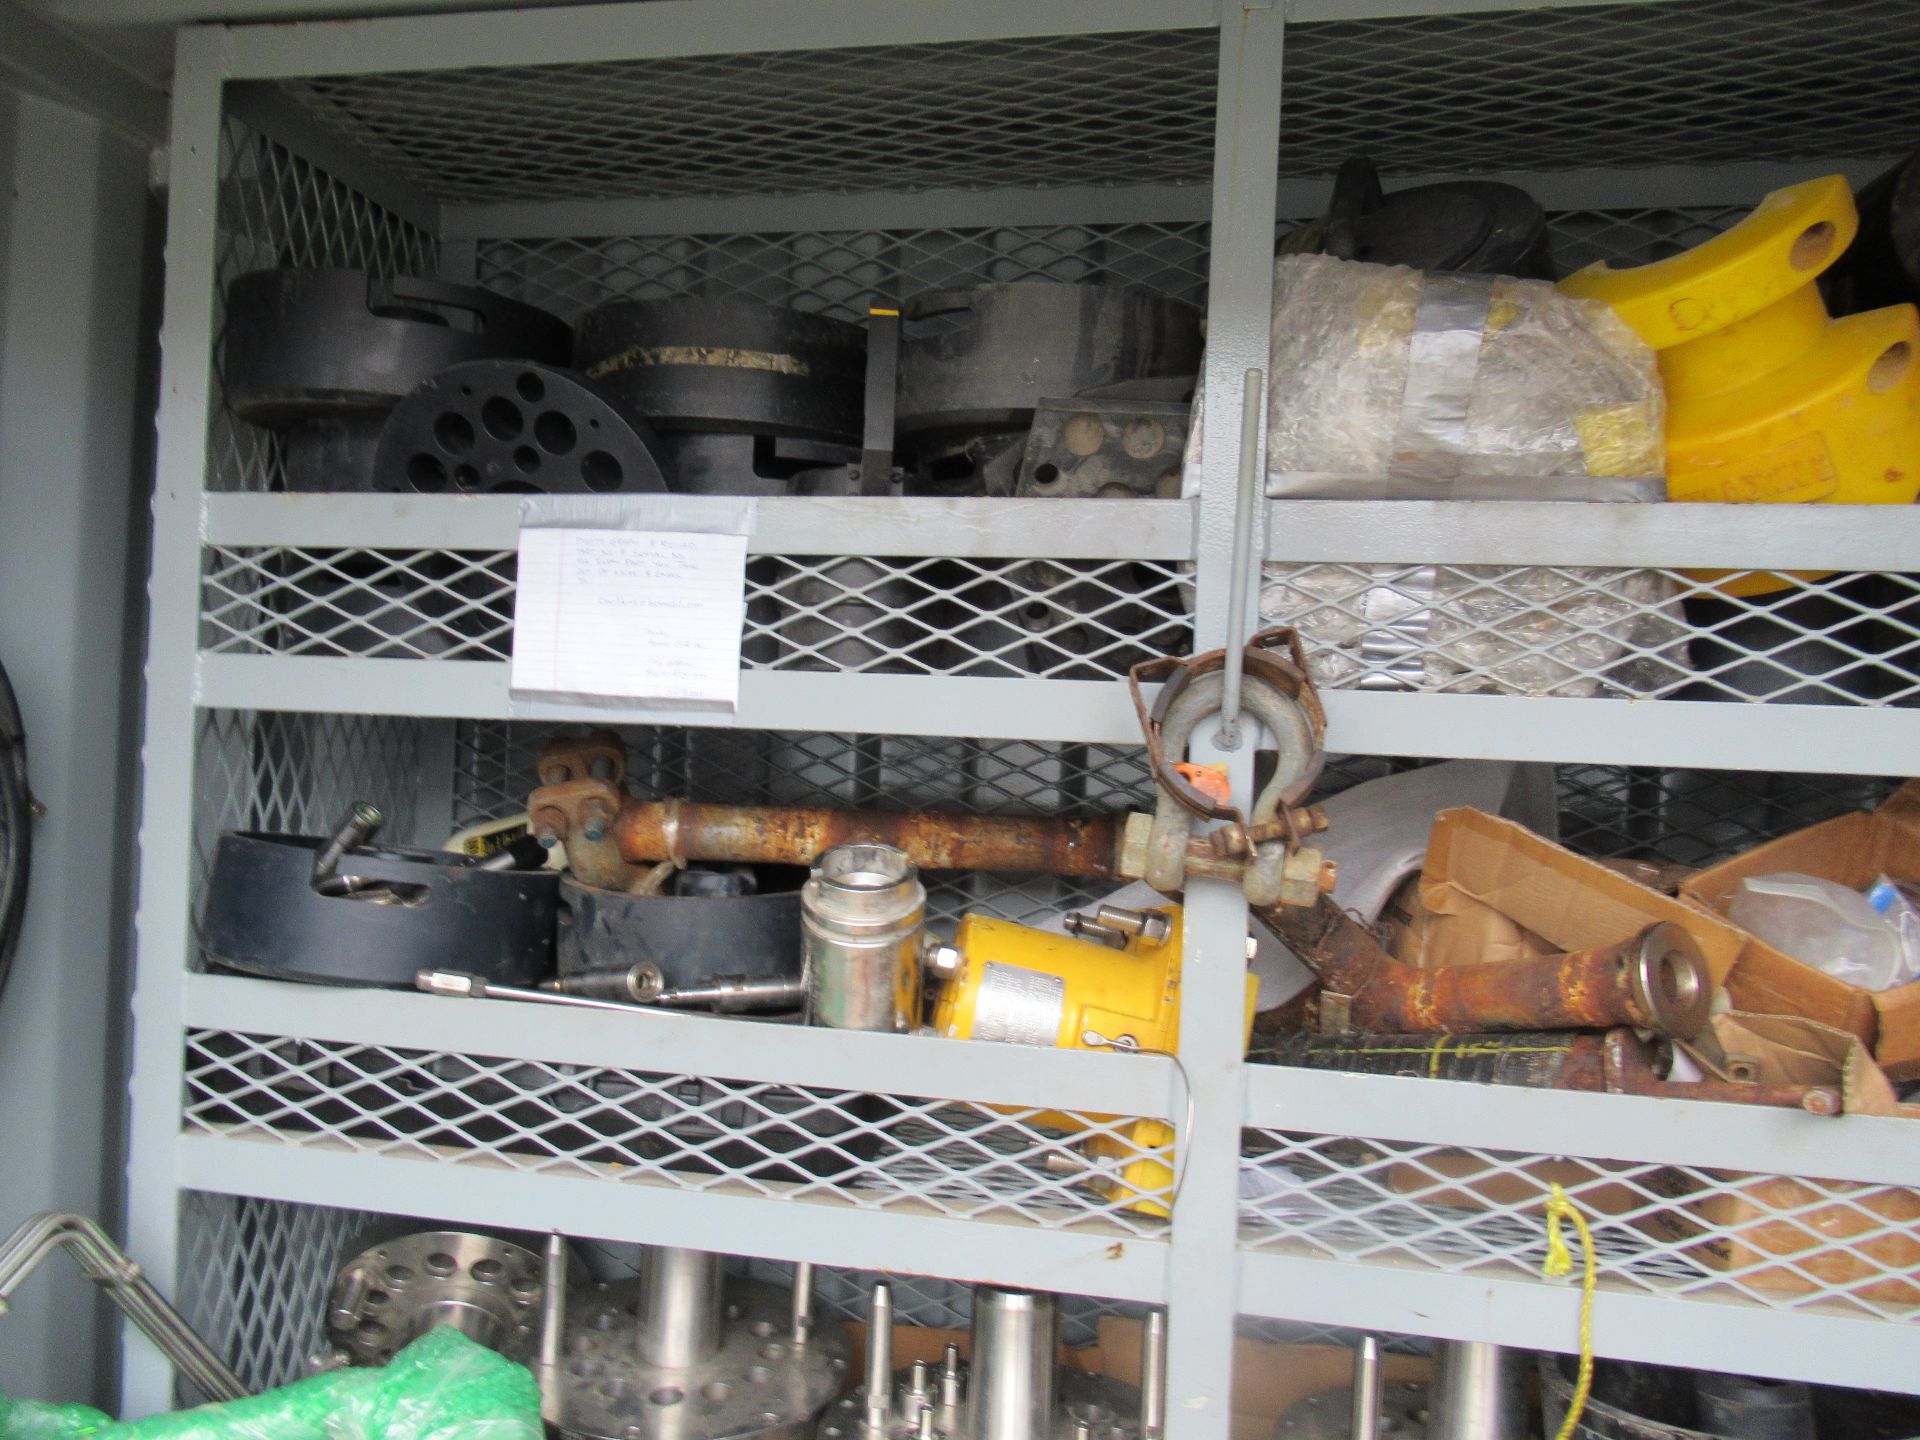 LOT CONSISTING OF 8’ X 4’ SEA CONTAINER AND CONTENTS, including subsea connectors and umbilical - Image 10 of 14